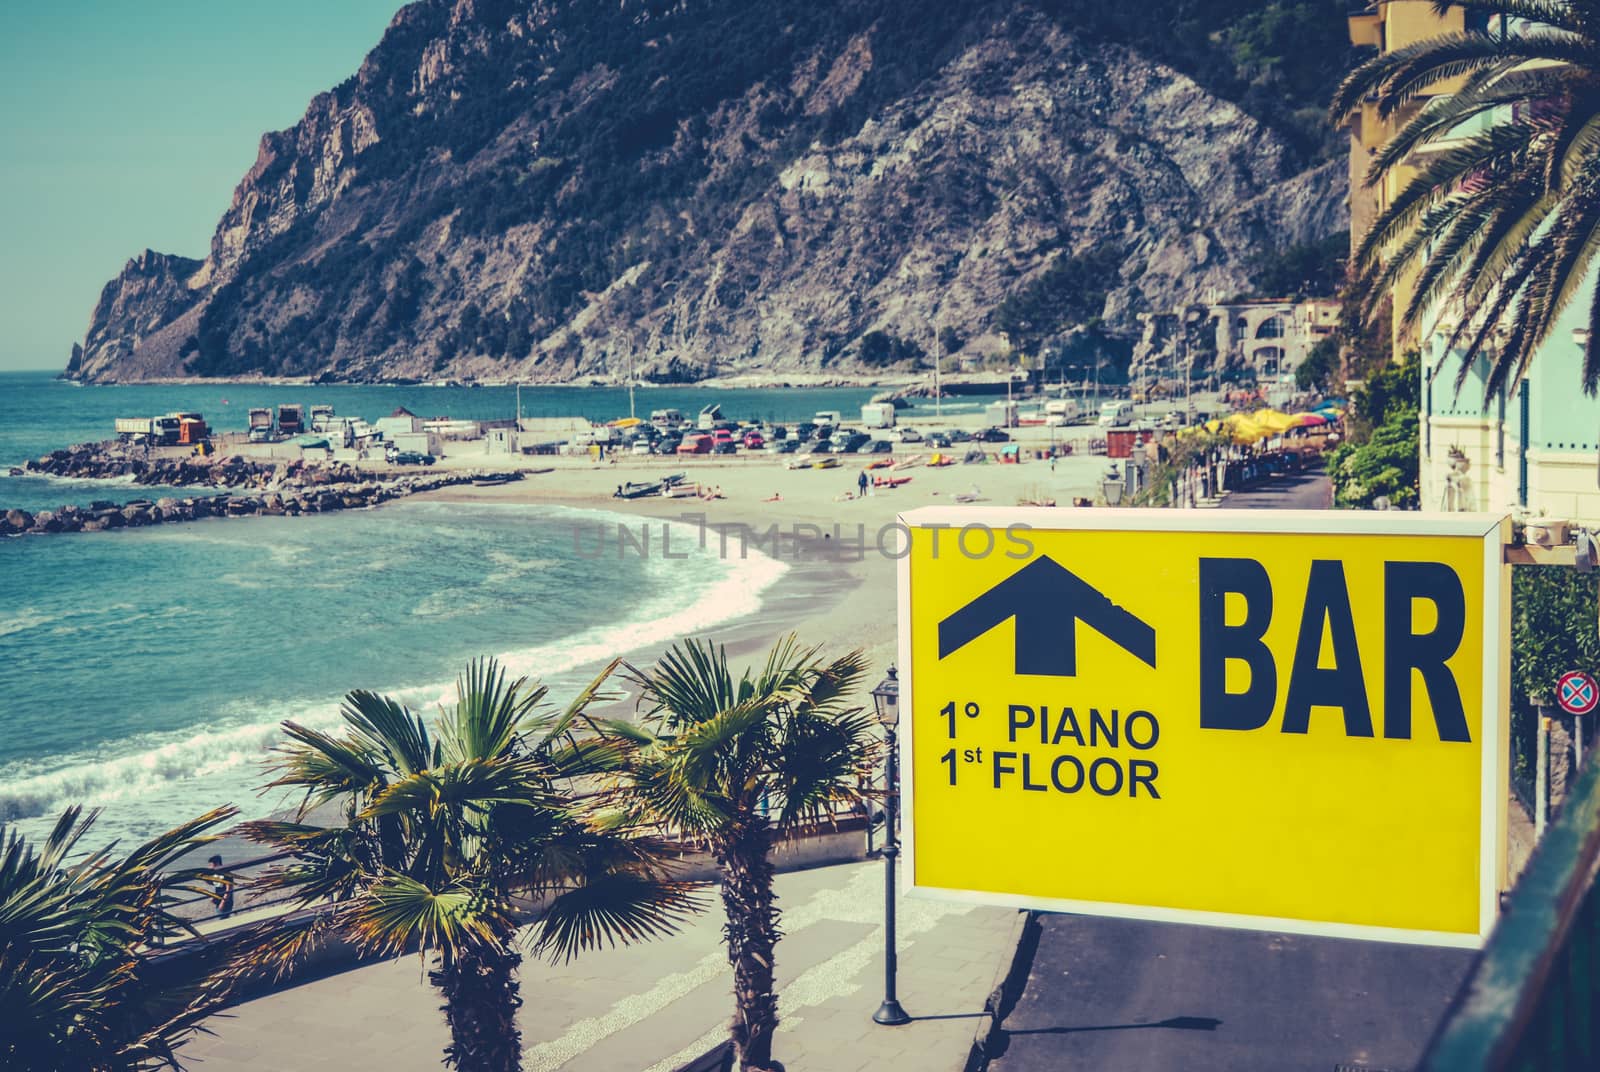 Retro Filtered Photo Of A Sign For A Beach Bar On The Italian riviera